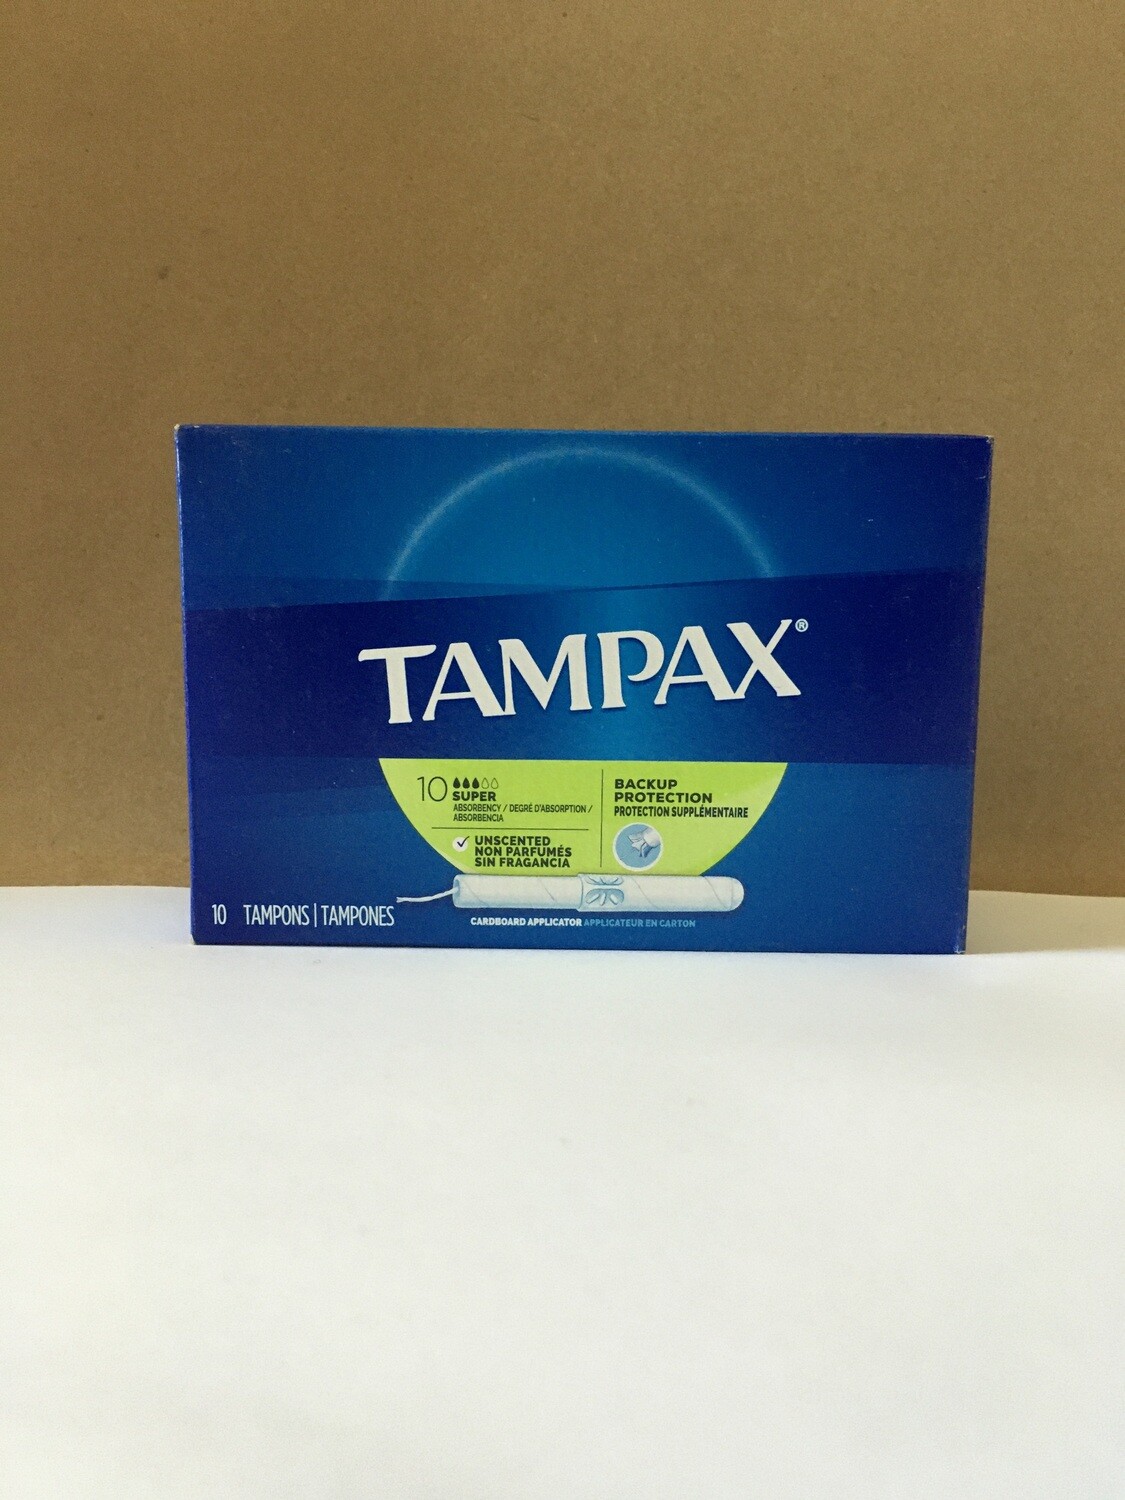 Health and Beauty / Feminine Products / Tampax Super